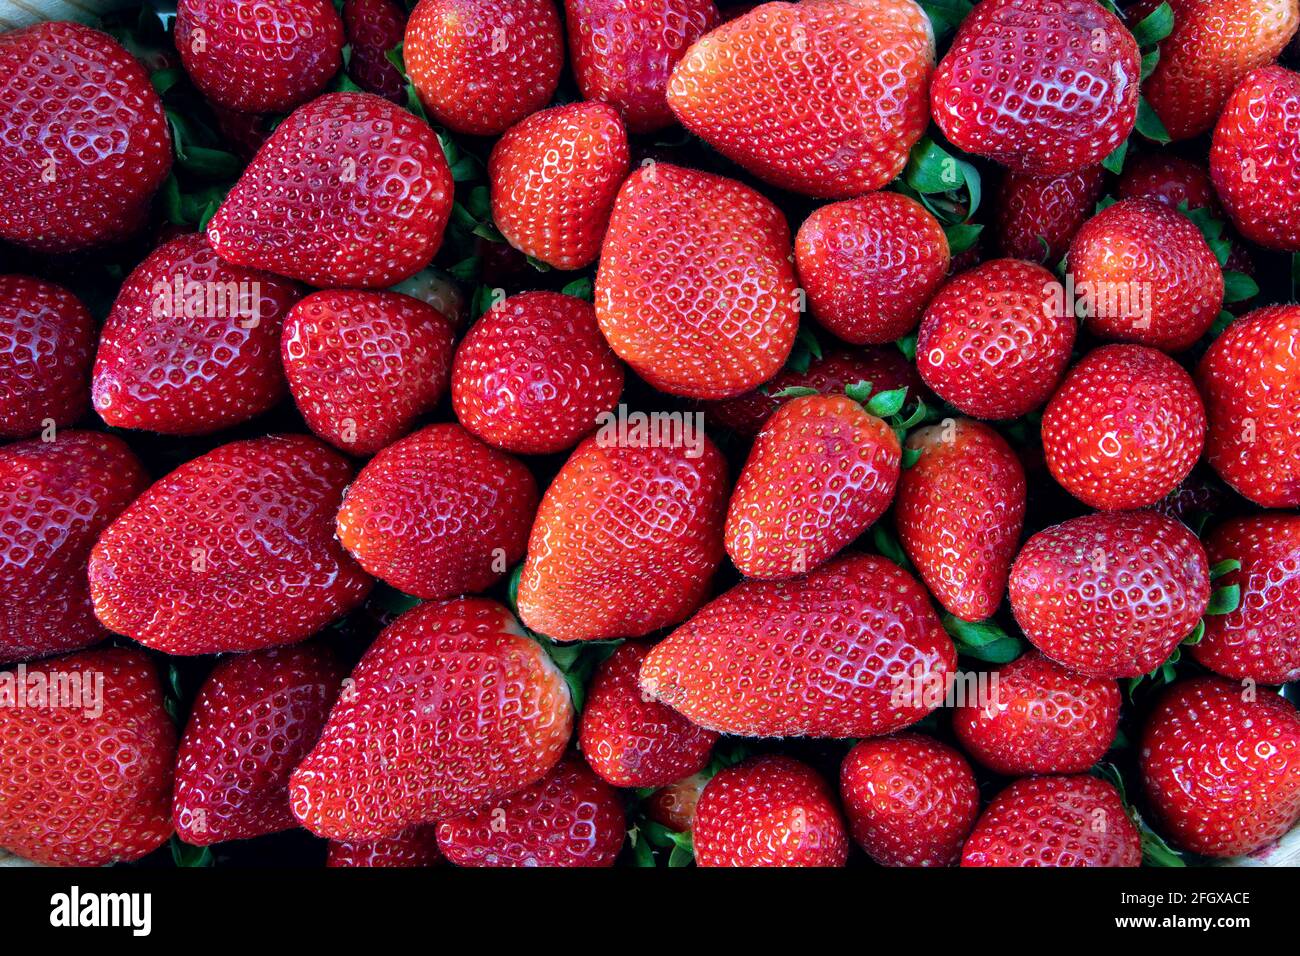 Ripe red strawberries. Season specific food. Fruits background. Stock Photo